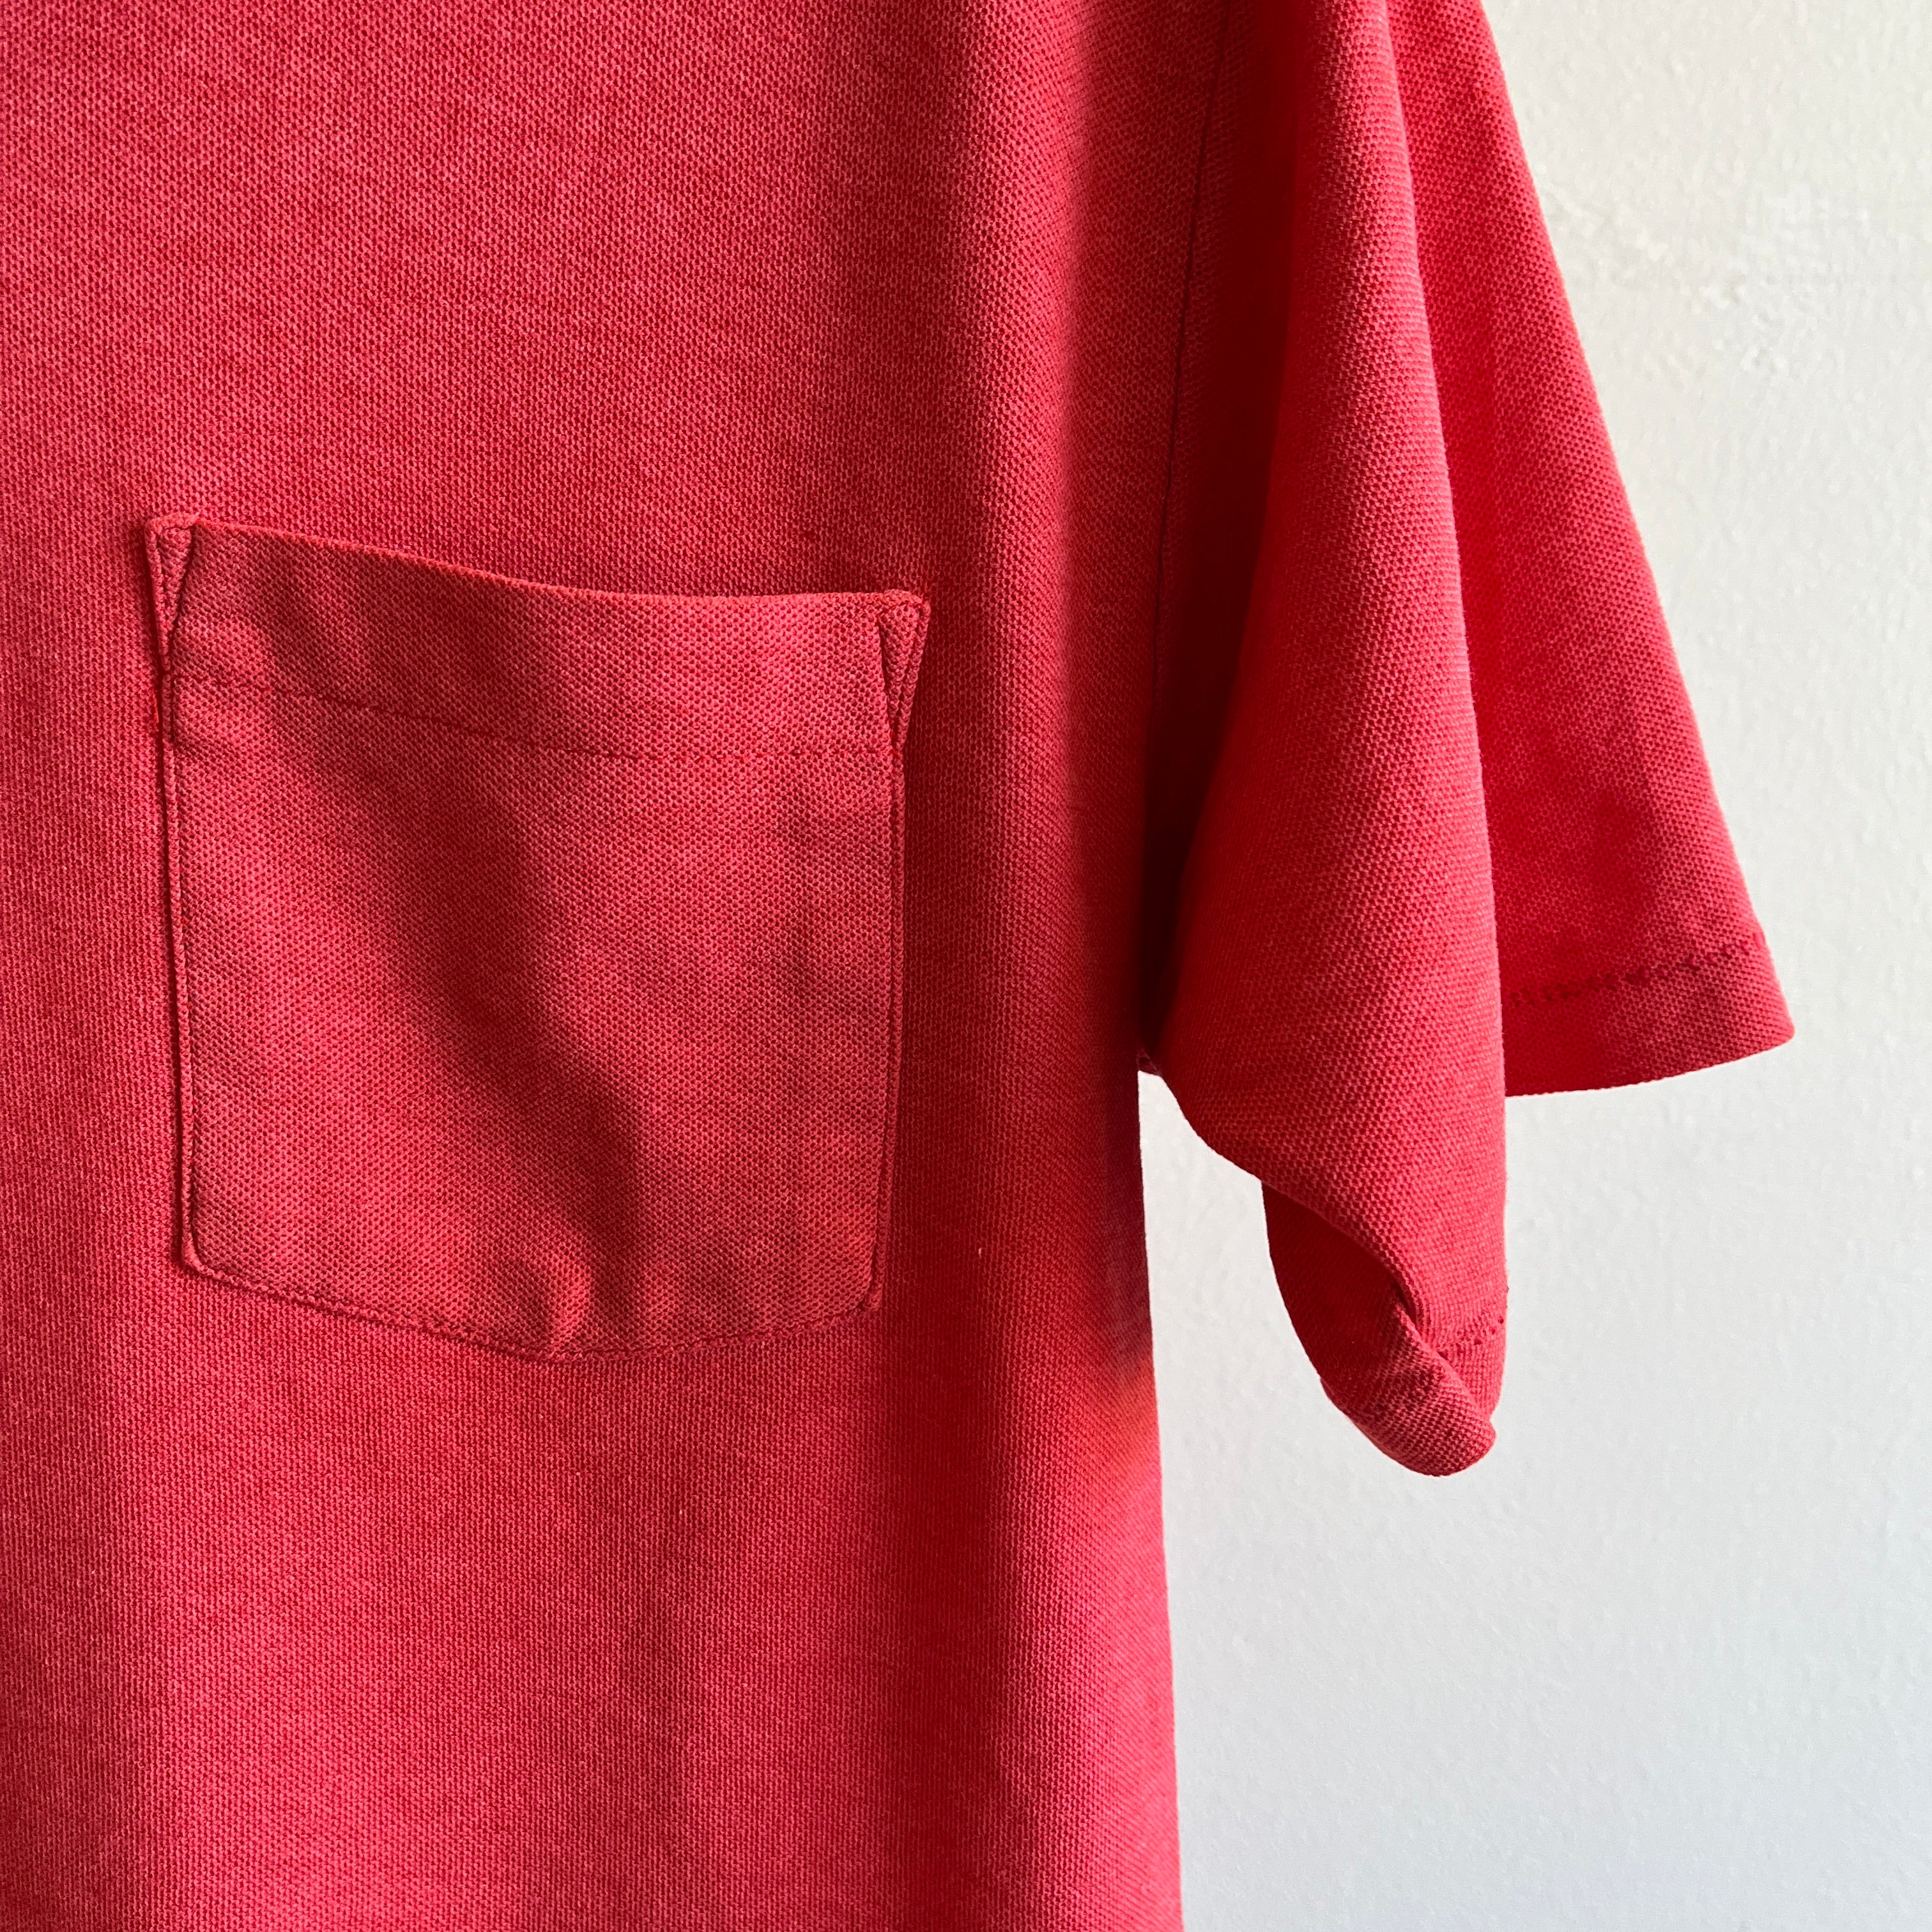 1980s Faded Red Polo Shirt by Screen Stars!!!!